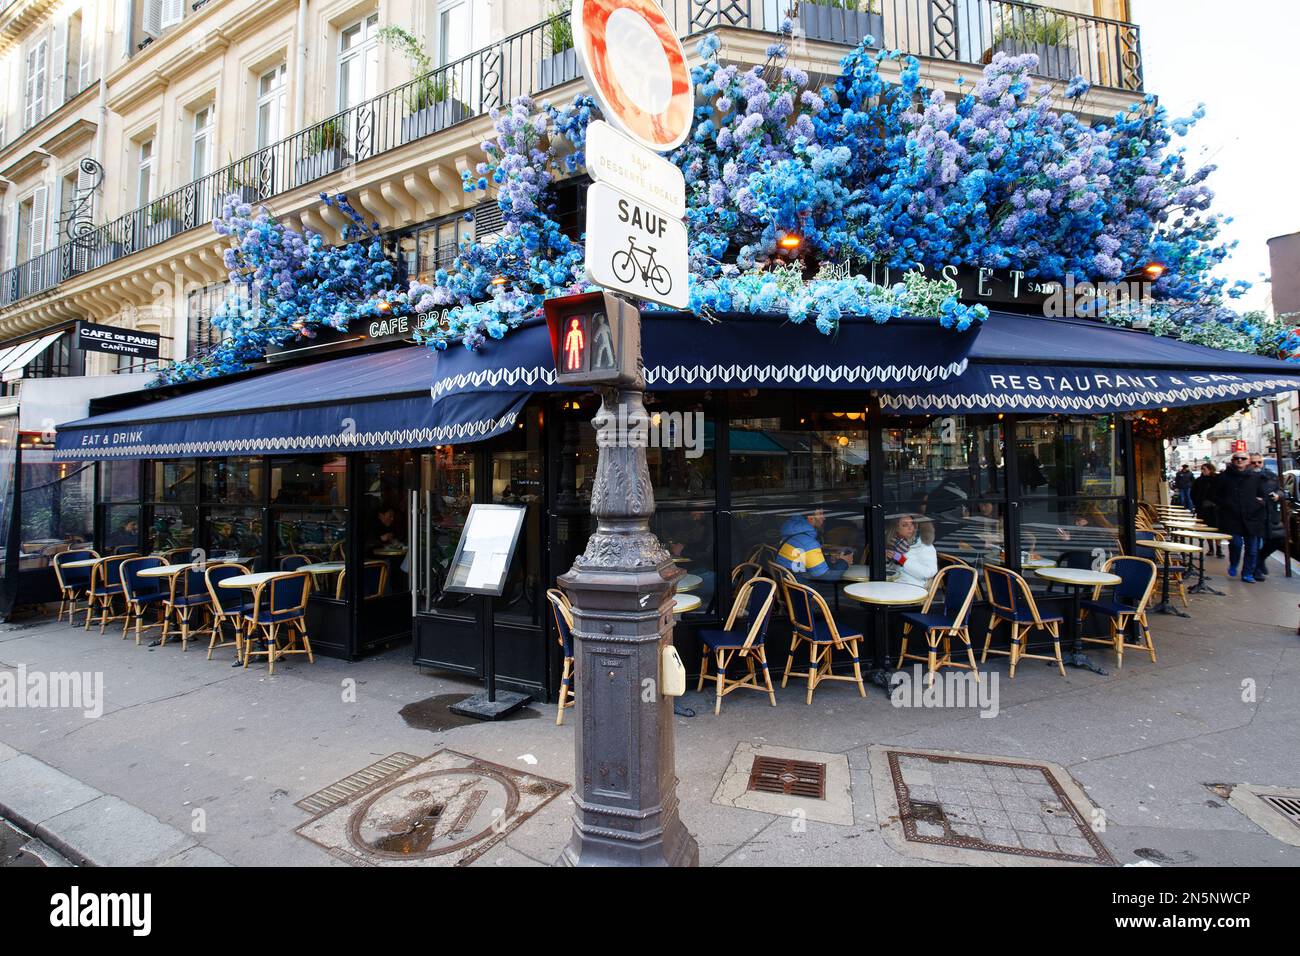 Exterior of Le Musset restaurant decorated with beautiful blue hydrangea flowers Stock Photo